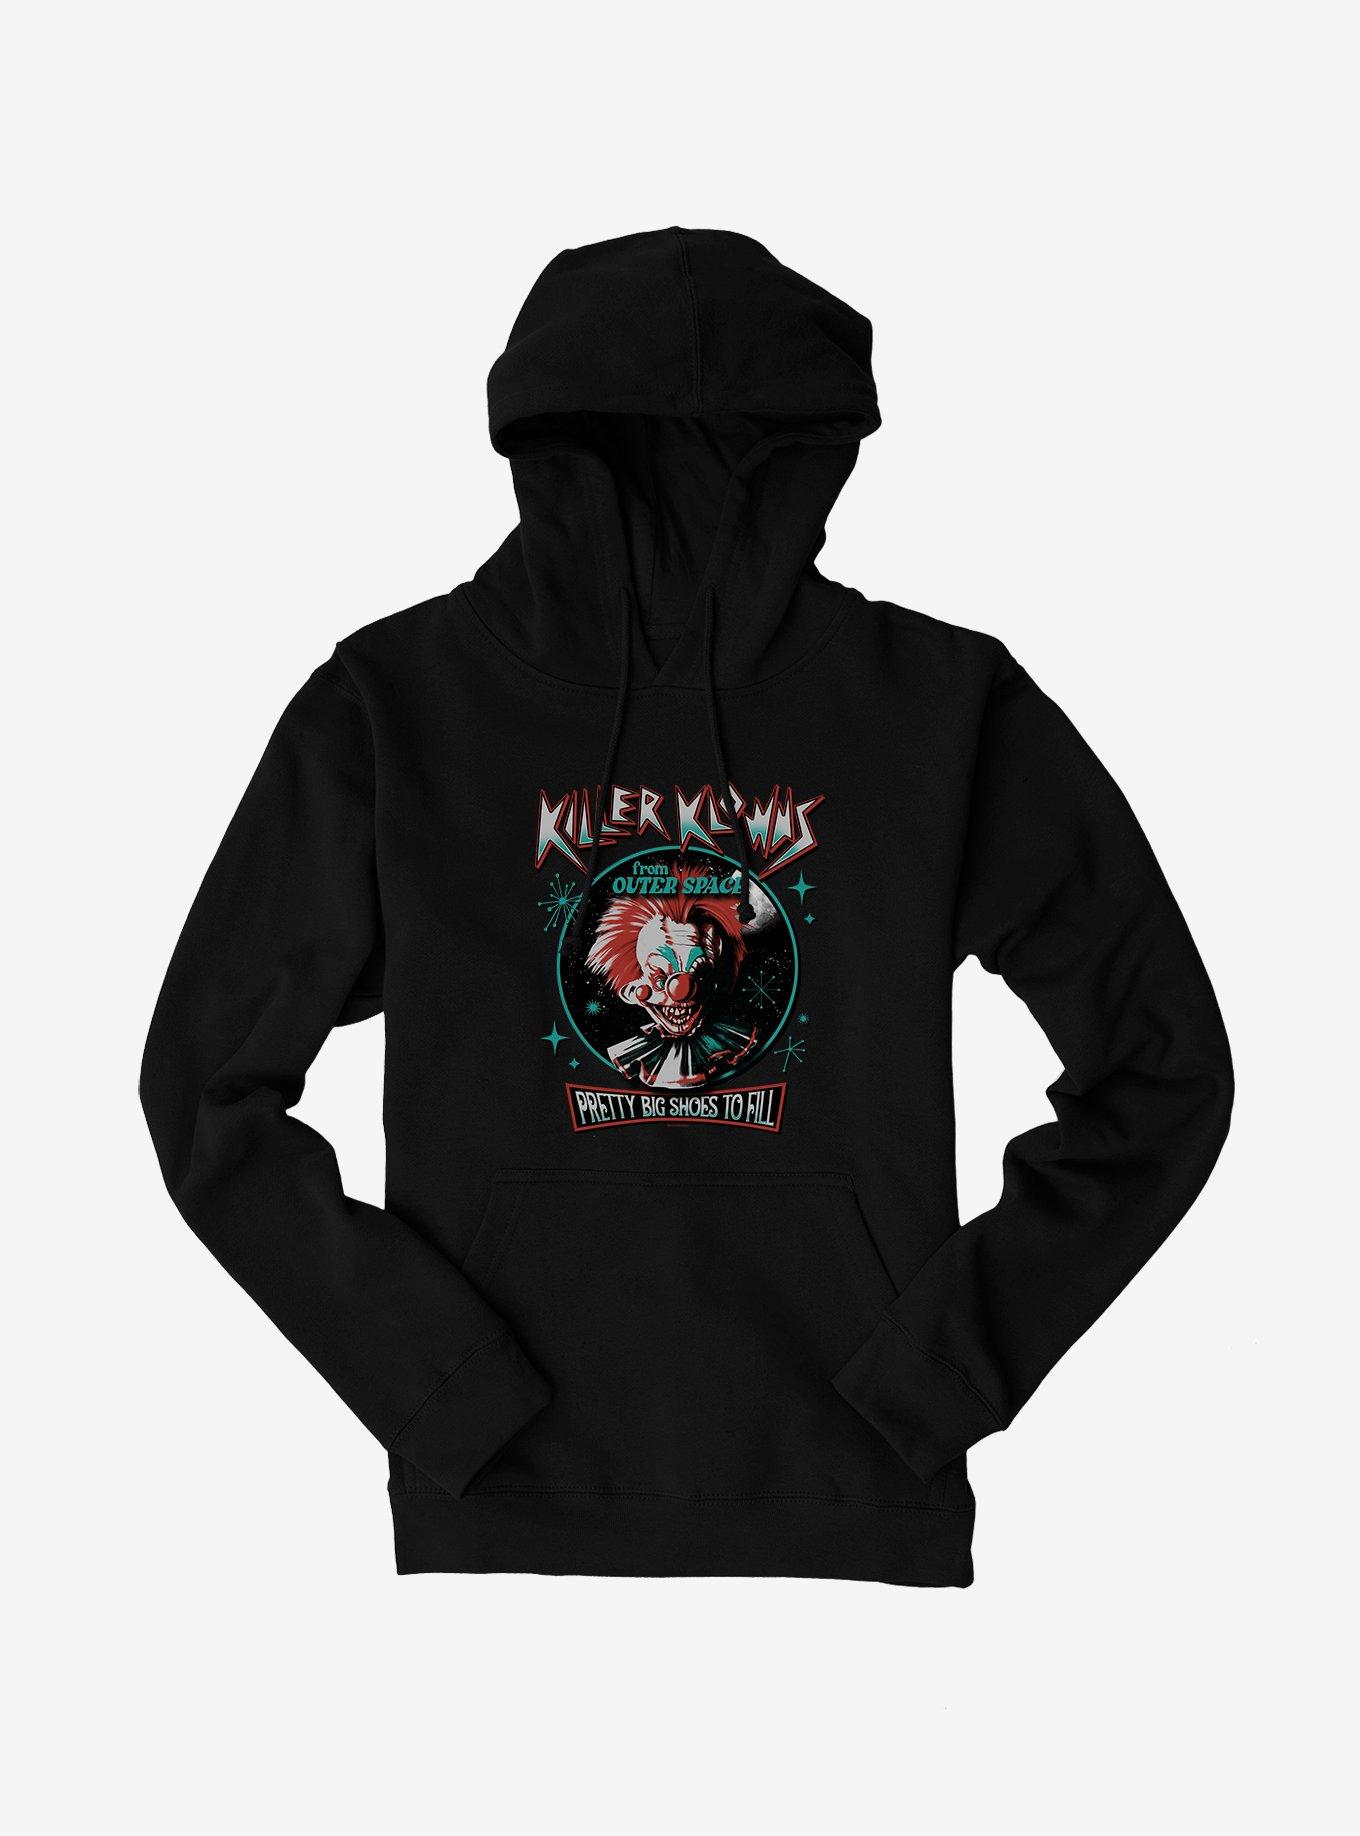 Killer Klowns From Outer Space Pretty Big Shoes To Fill Hoodie, BLACK, hi-res